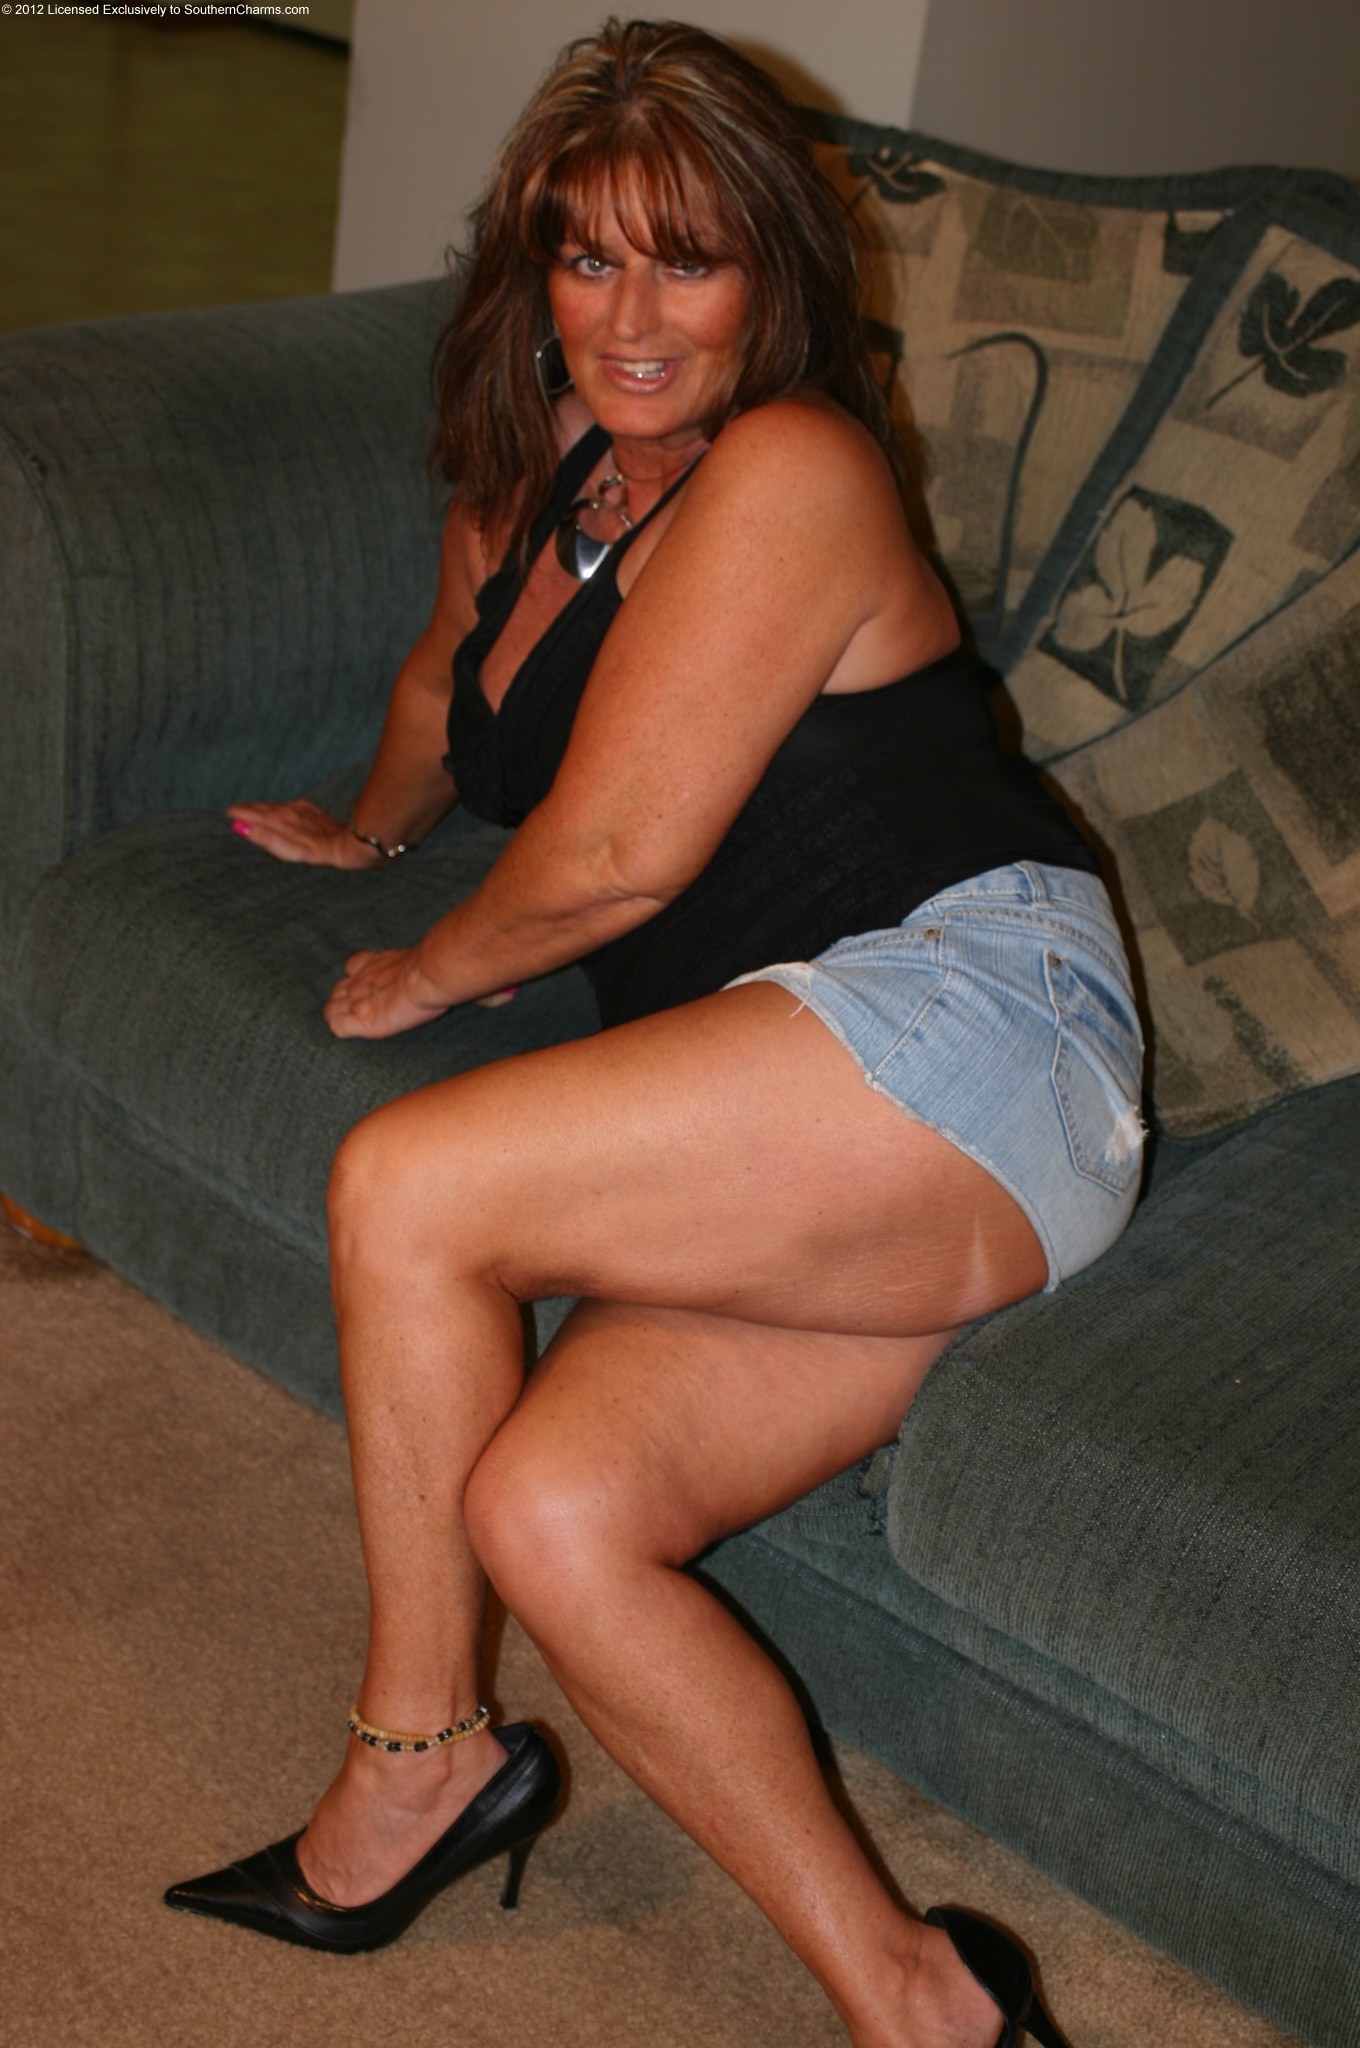 Click Here to see the Rest of the Southern Charms 3.